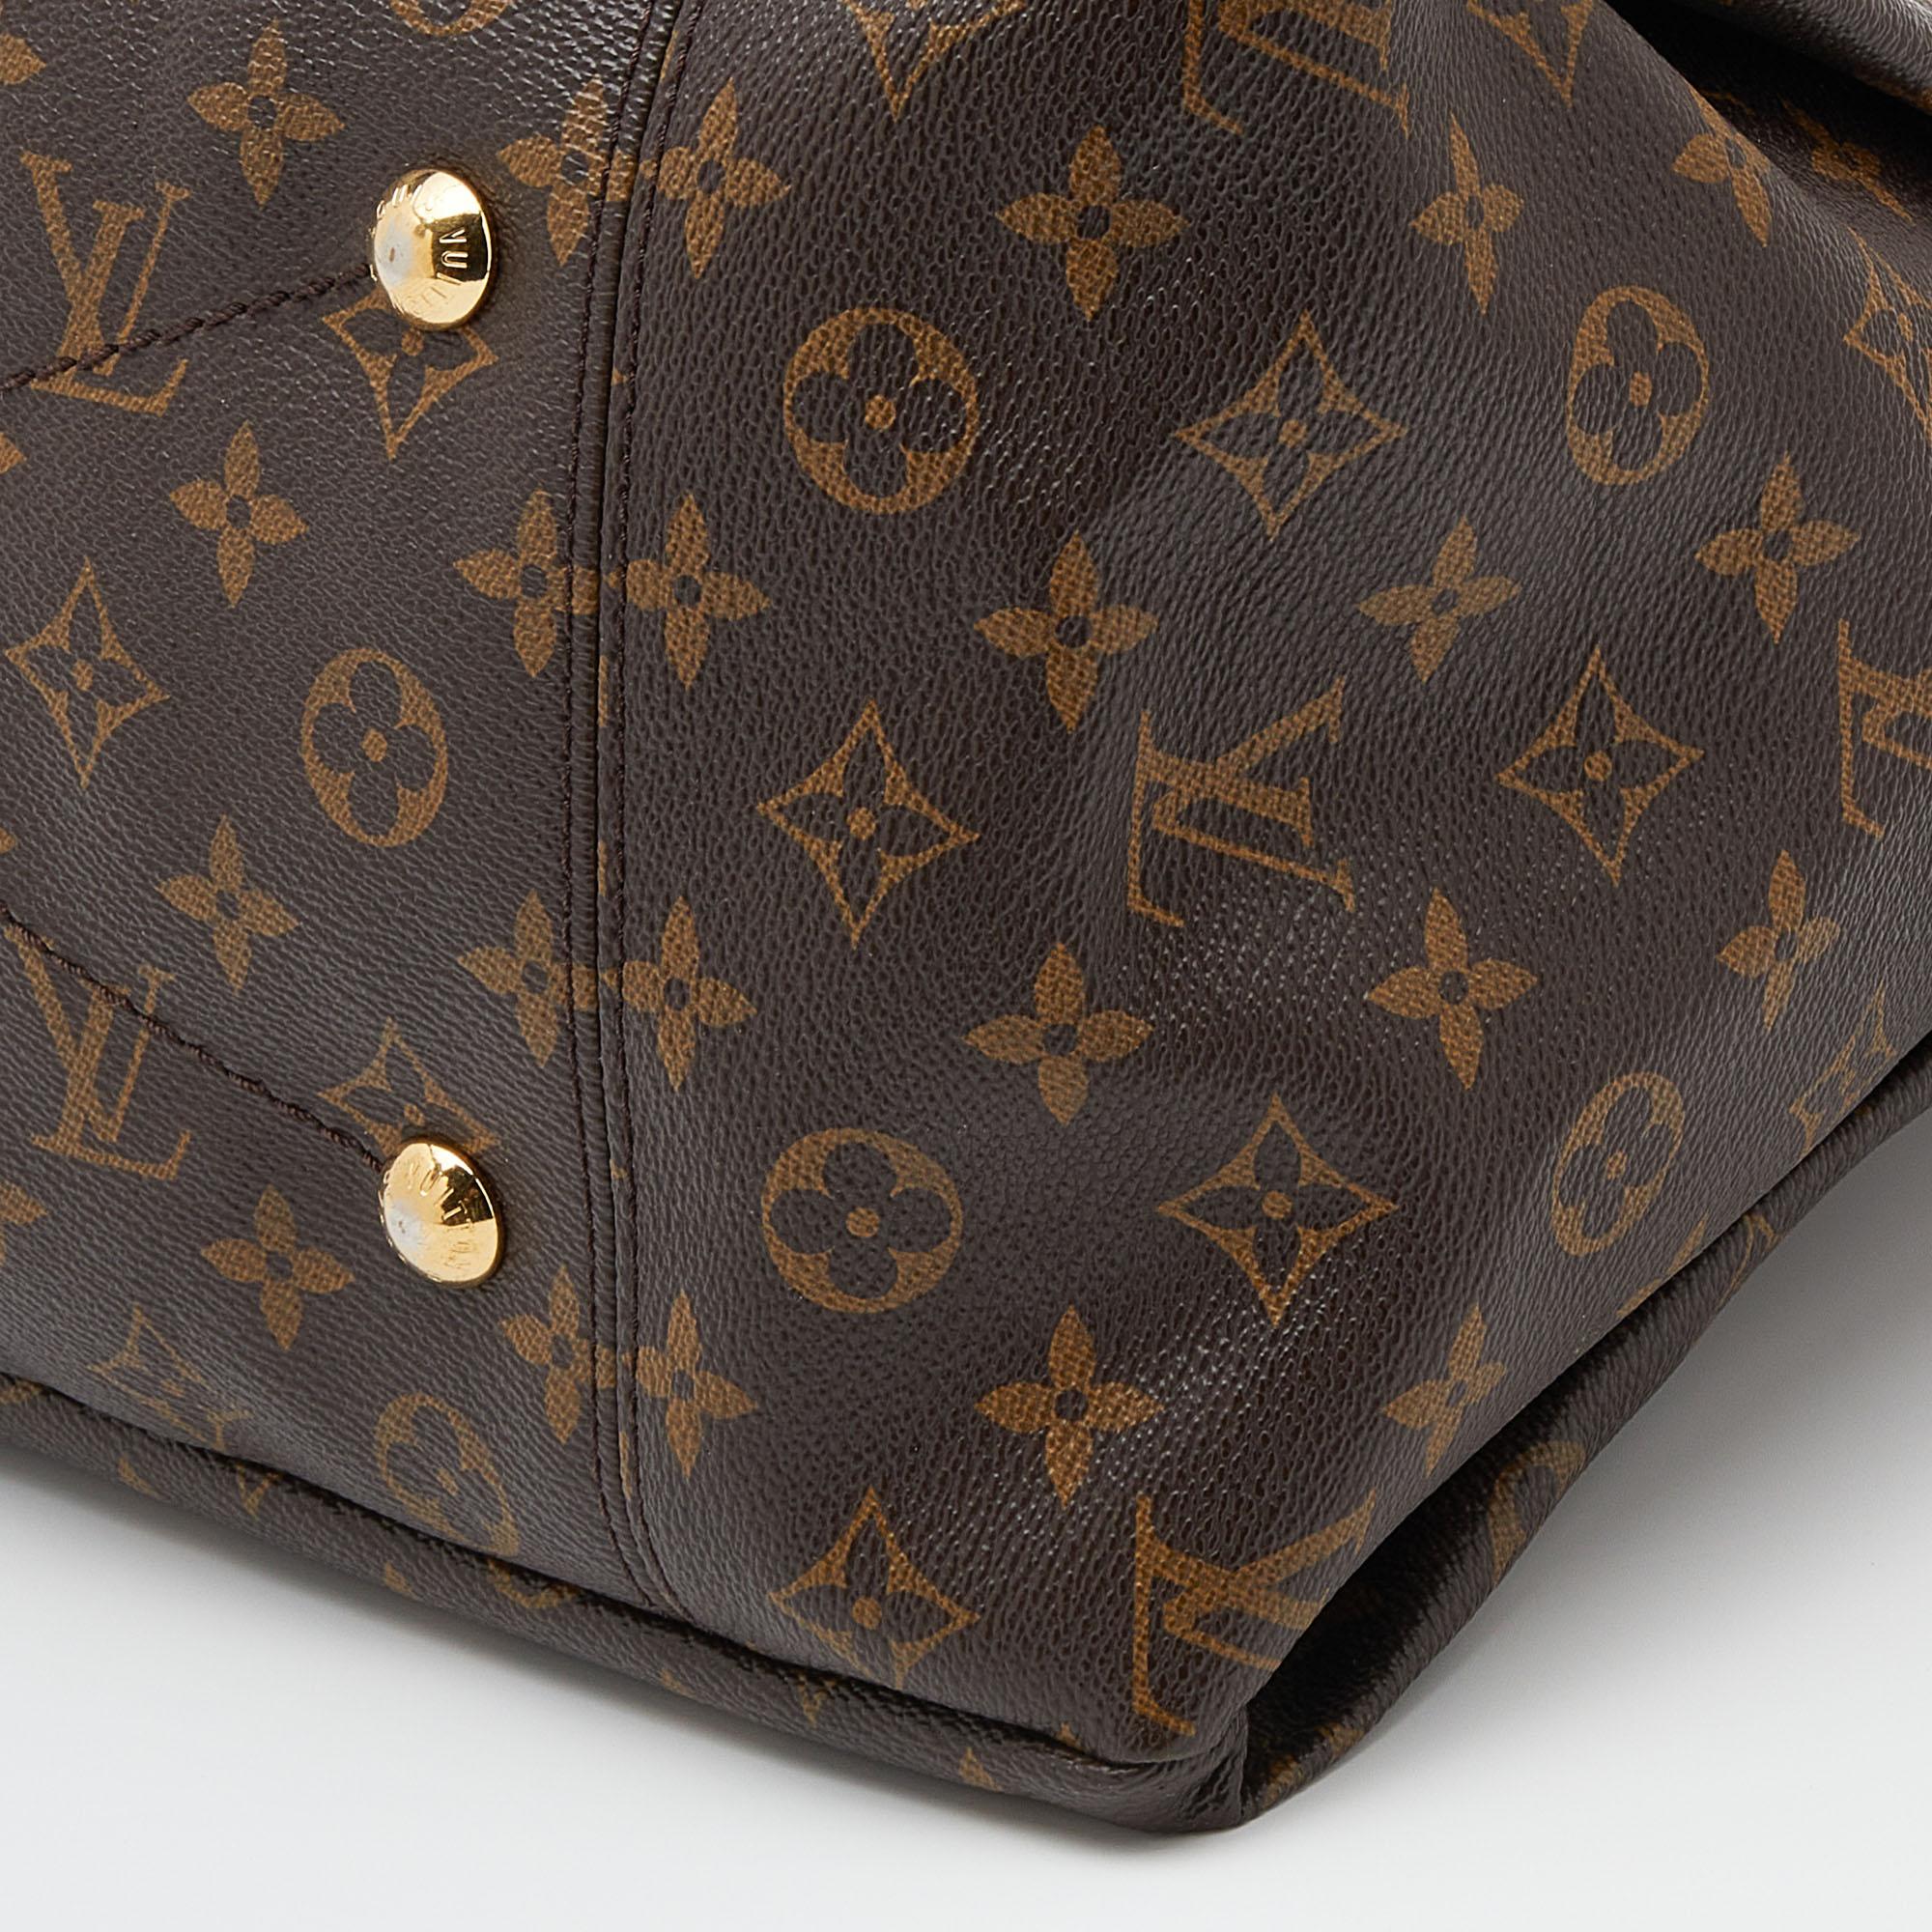 Louis Vuitton Monogram Canvas and Leather Artsy MM Bag 4